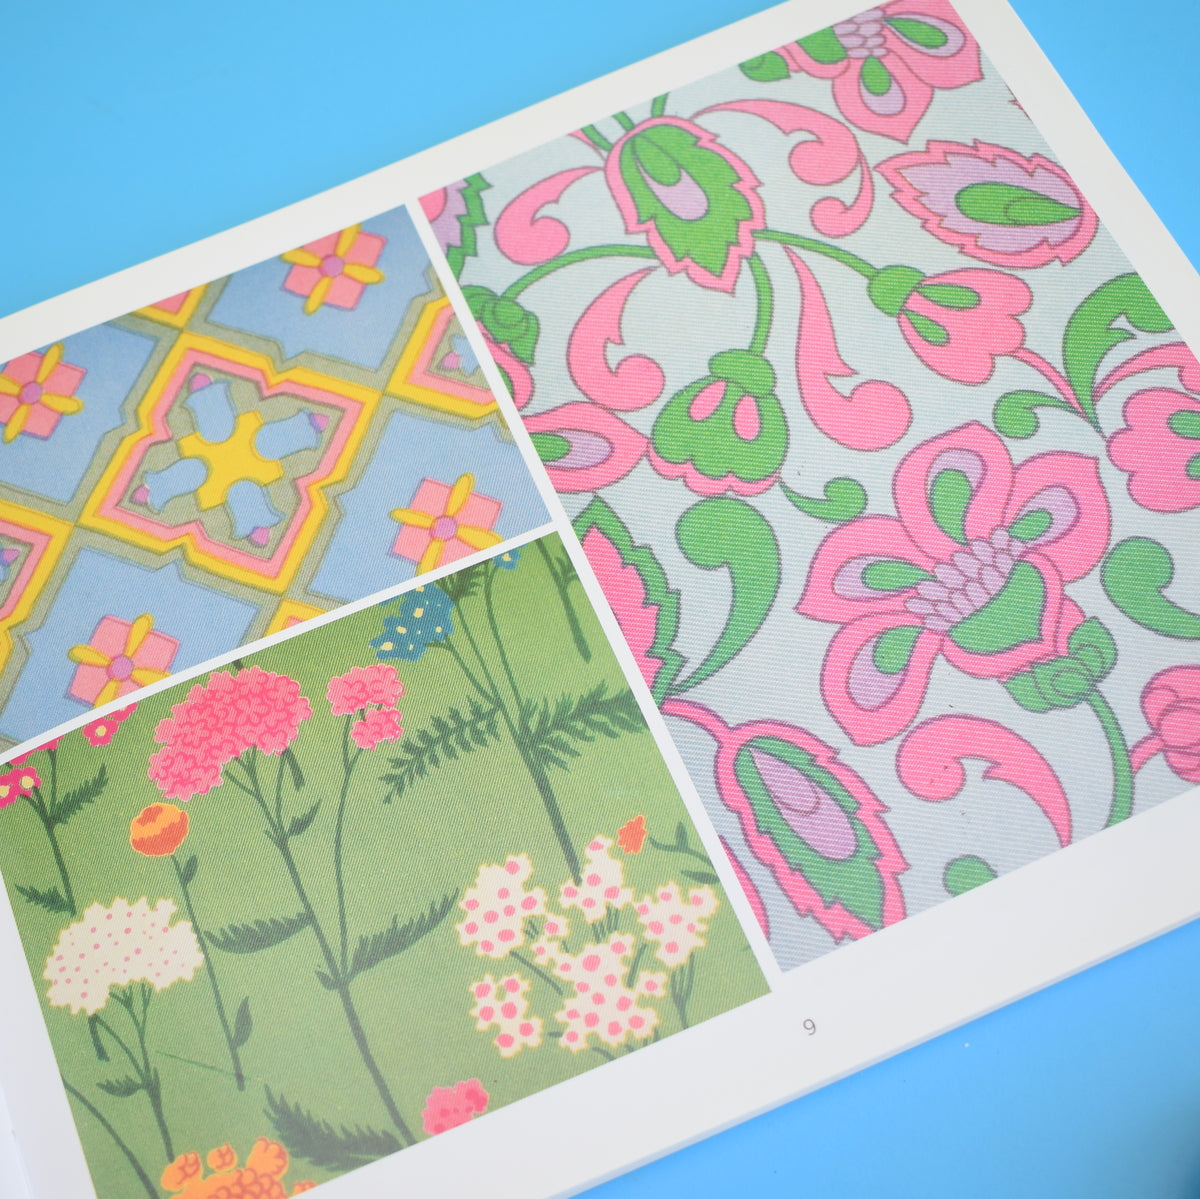 Retro Book - Flower Power Prints from The 1960s - Schiffer Book for Designers & Collectors